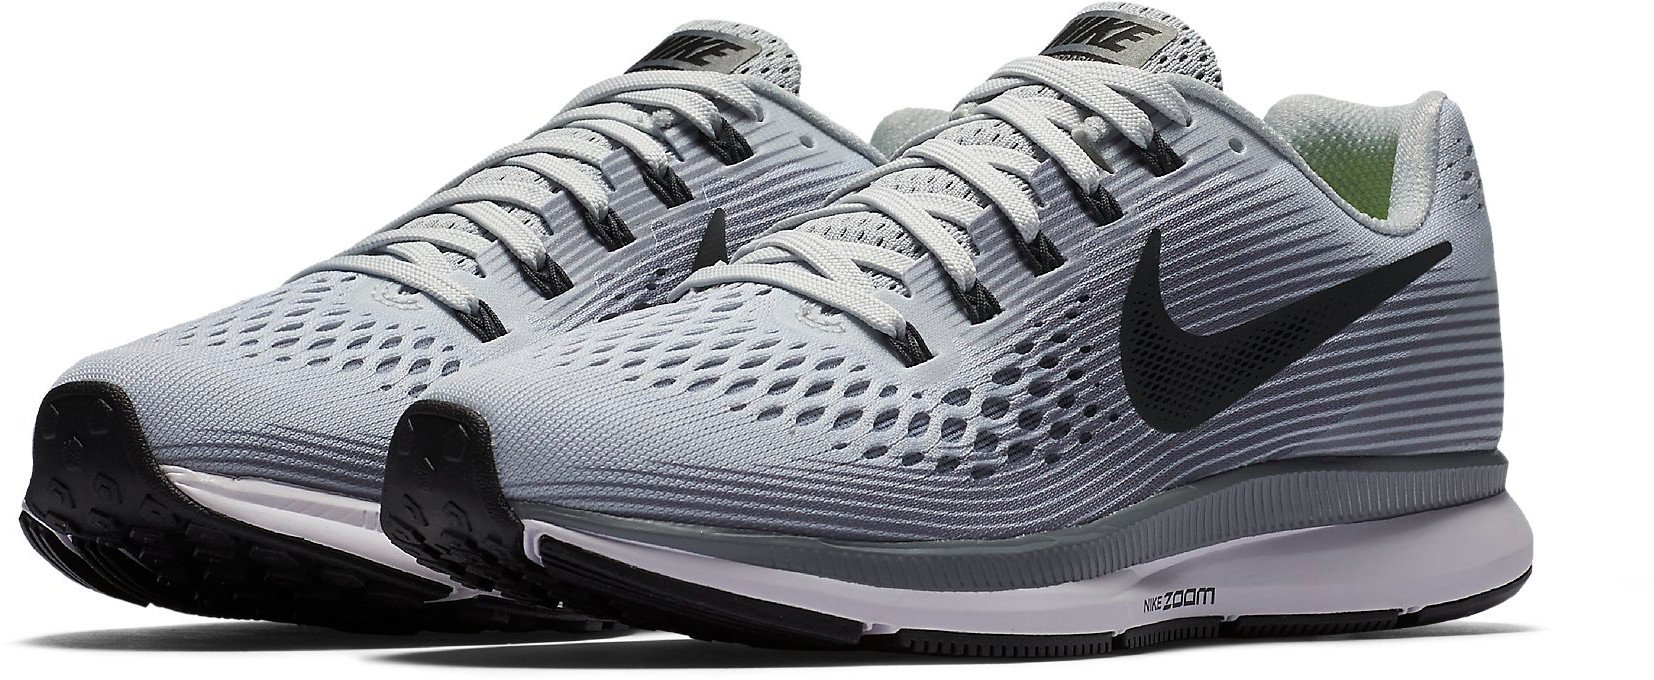 Running shoes Nike WMNS AIR ZOOM PEGASUS 34 - Top4Fitness.com